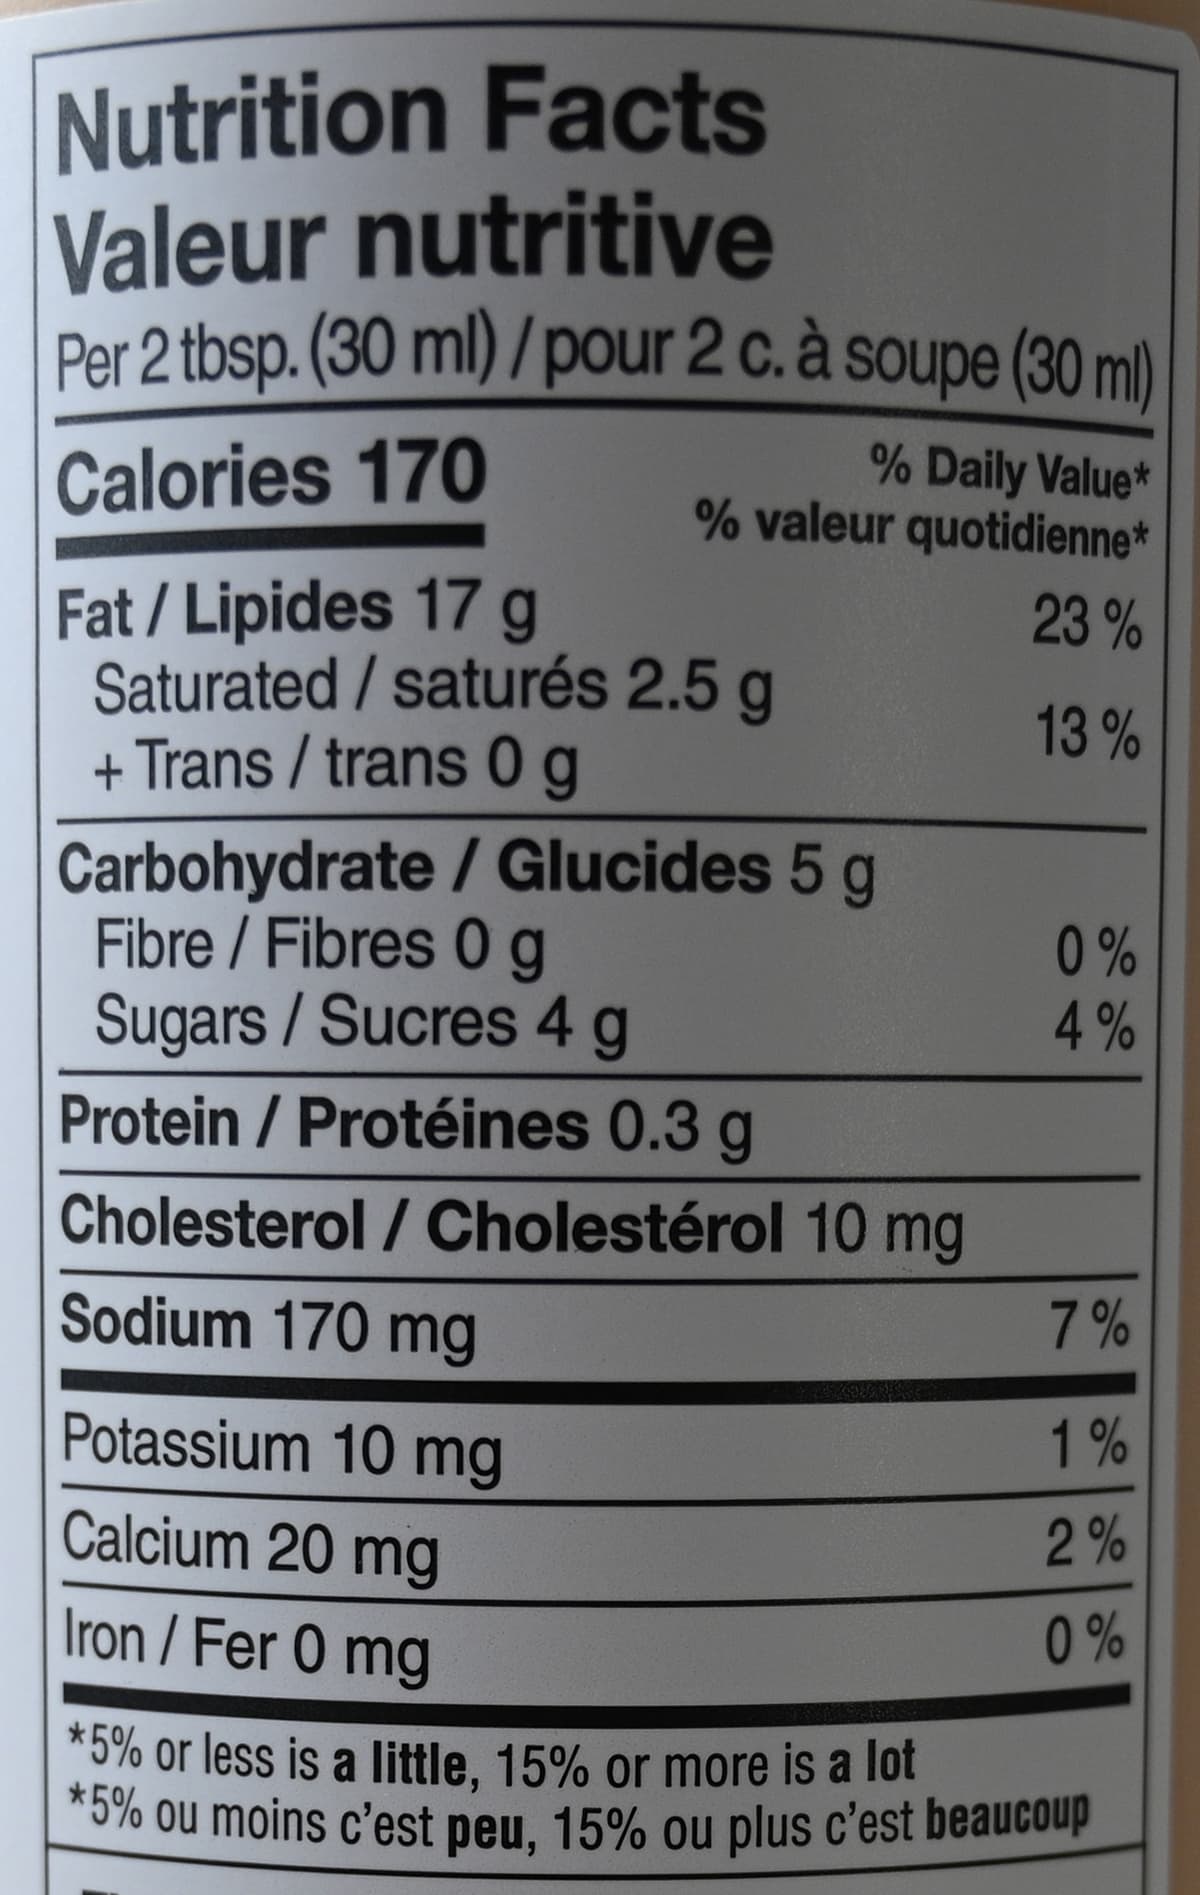 Image of the nutrition facts for the sauce from the back of the container.